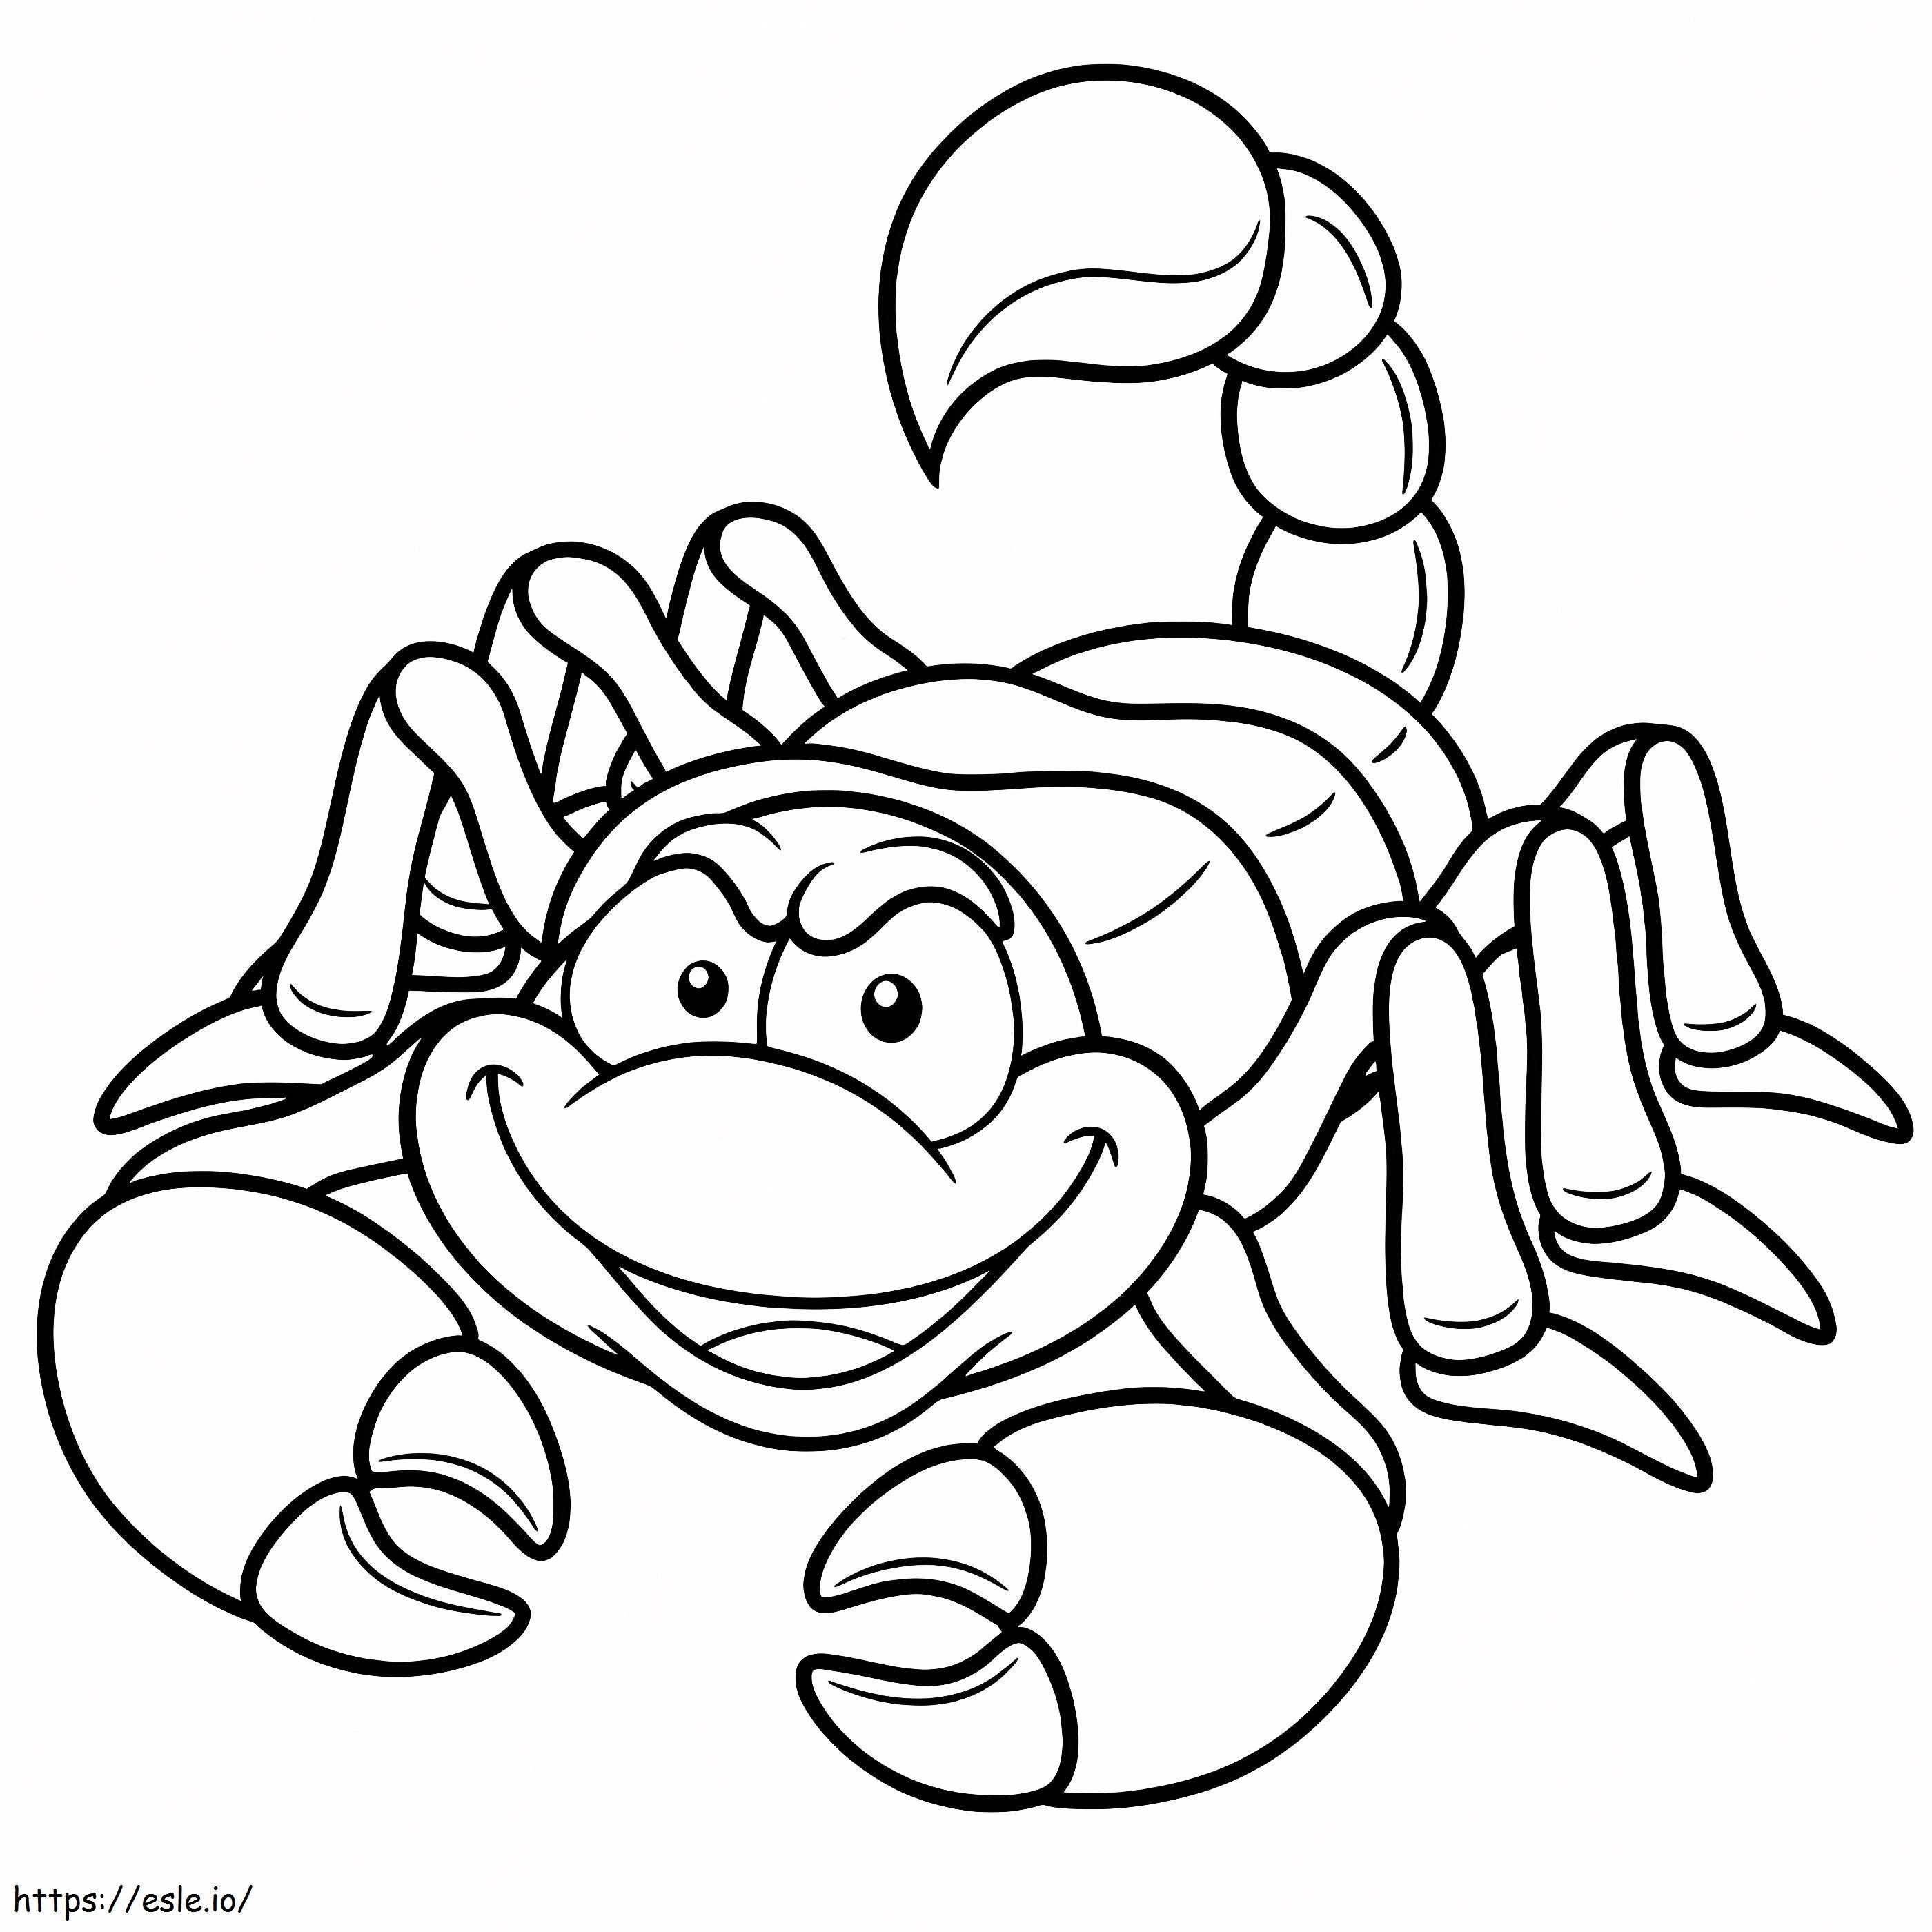 1532140621 Cartoon Scorpion A4 coloring page